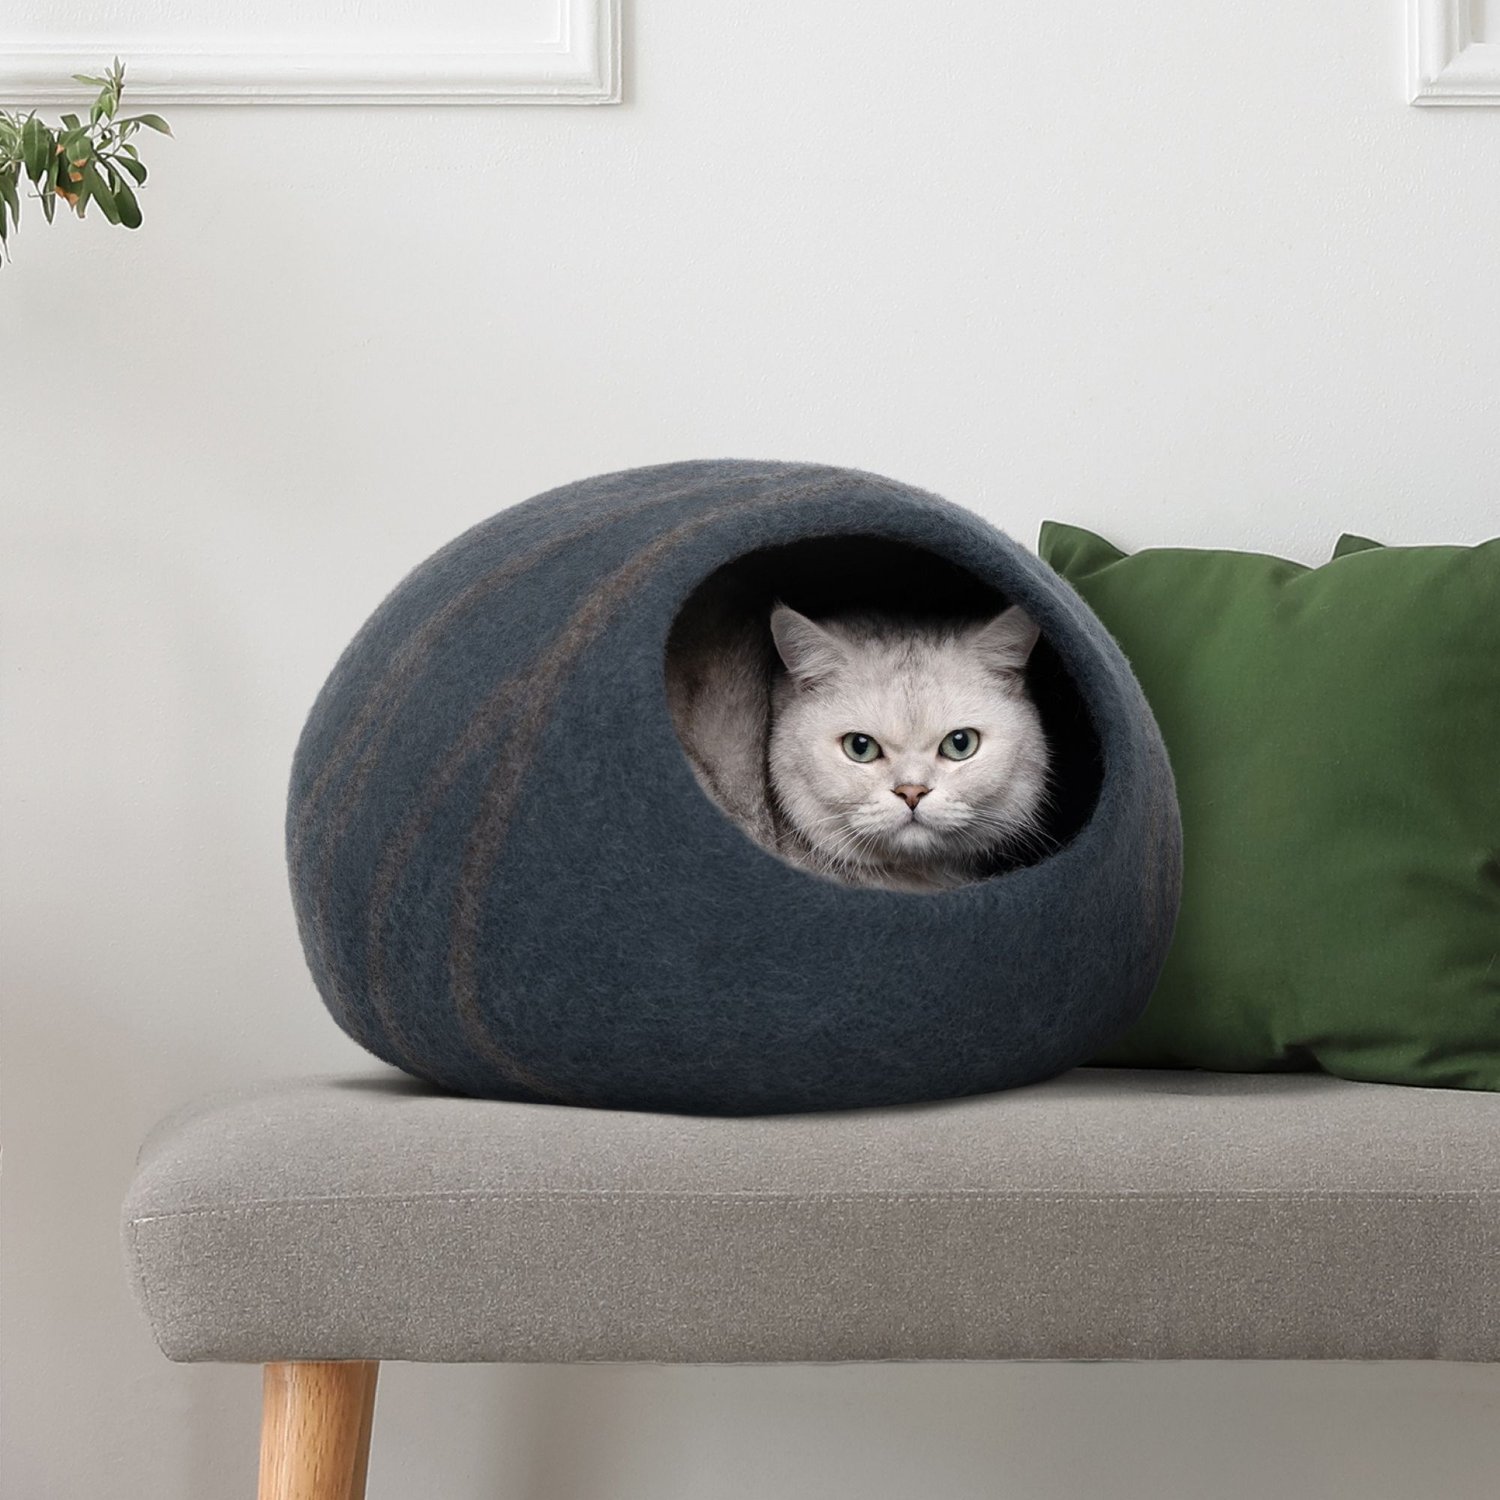 How To Make A Felted Cat Cave